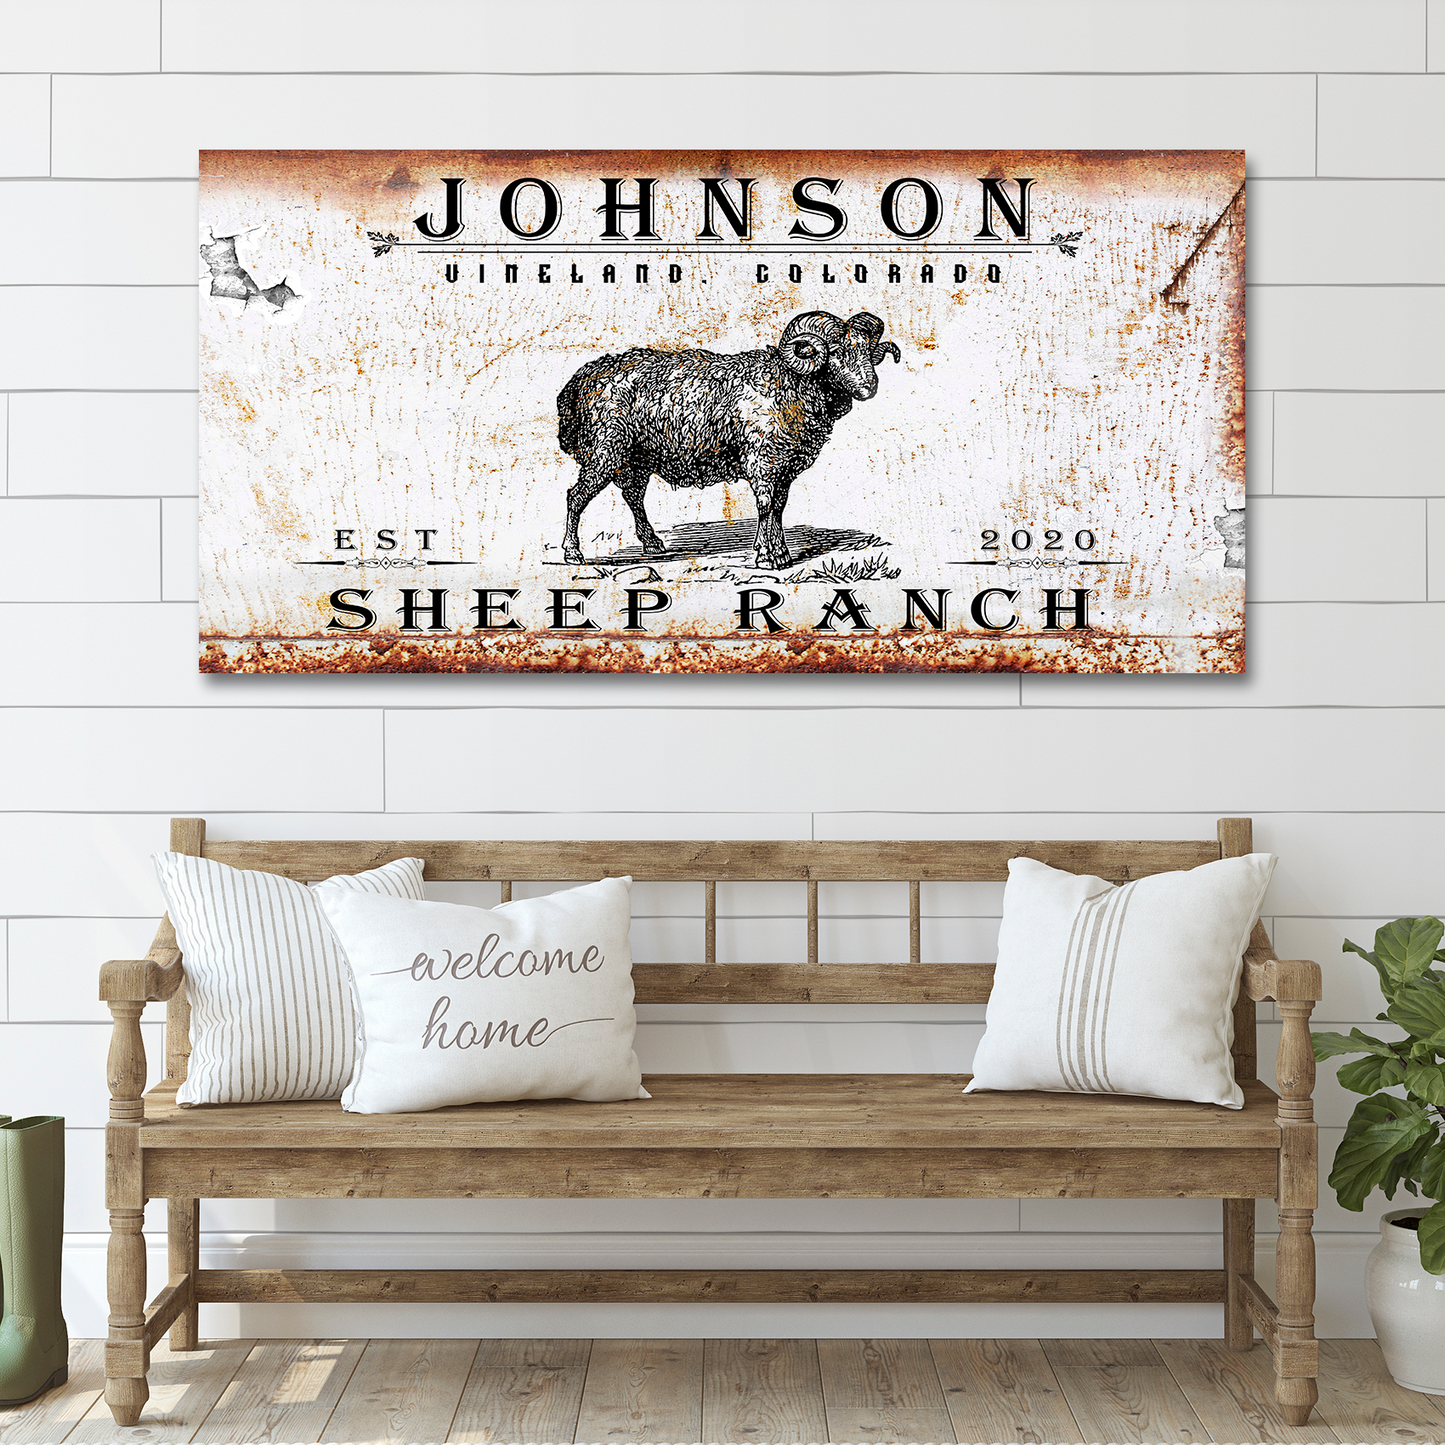 Sheep Ranch Sign - Image by Tailored Canvases